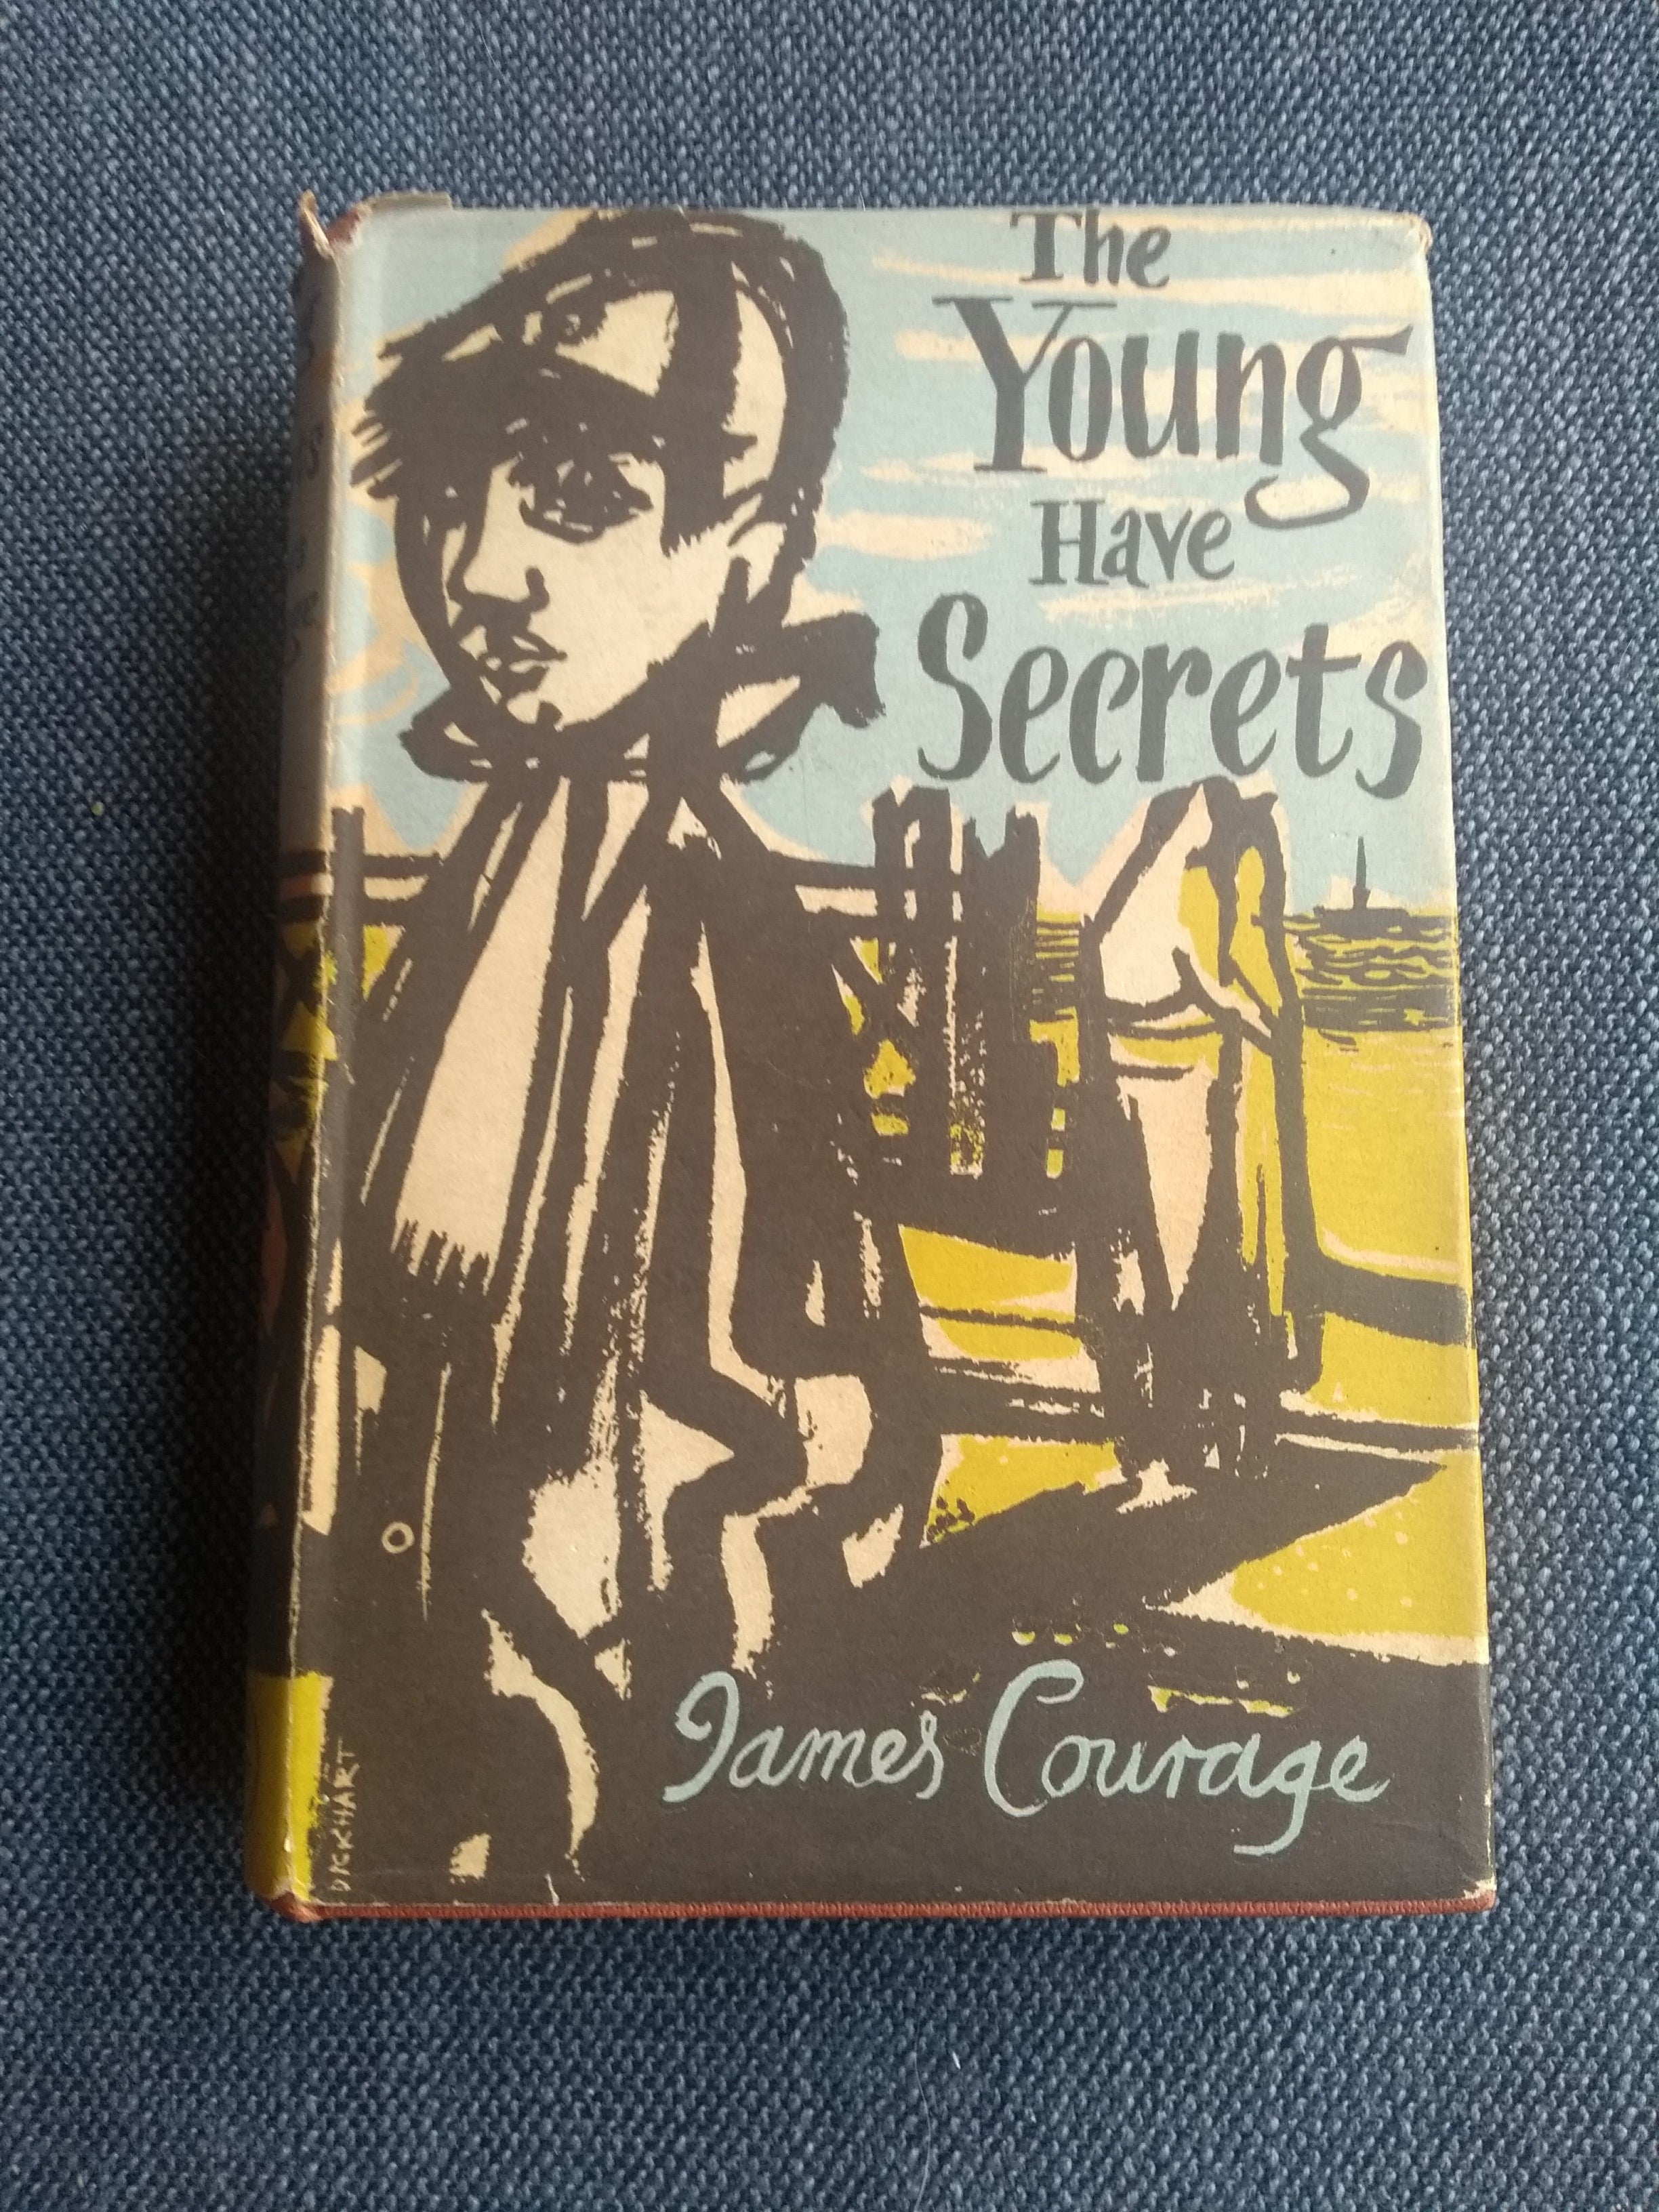 The Young Have Secrets, by James Courage